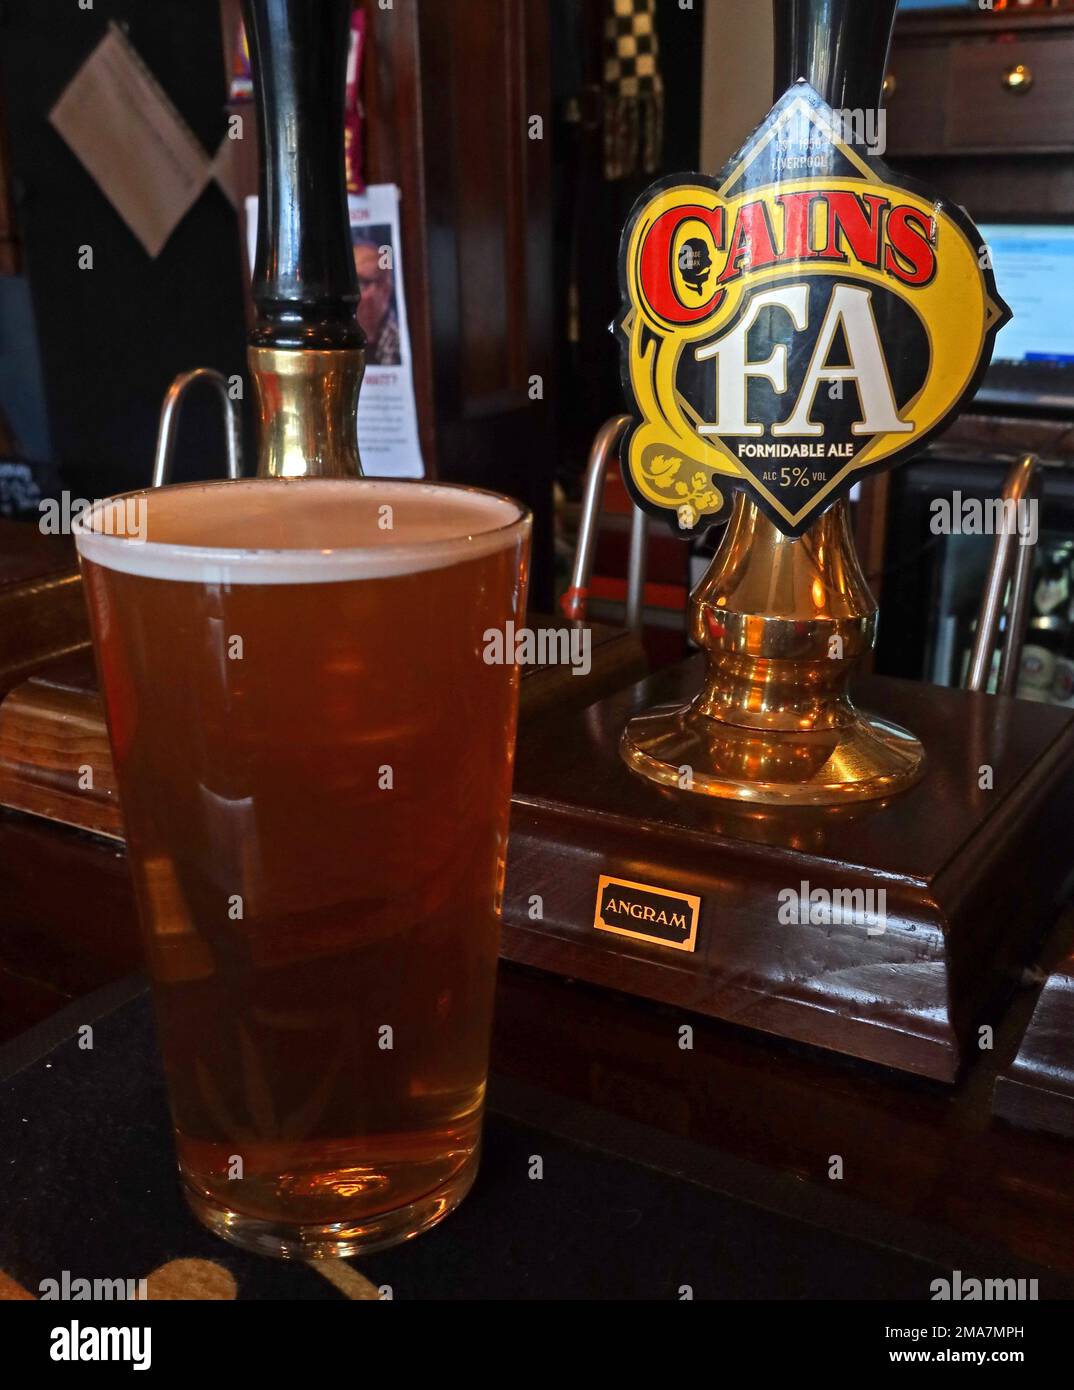 Cains FA formidable pompe Ale au Doctor Duncan's bar, St John's LN, Queen Square, Liverpool, Merseyside, Angleterre, Royaume-Uni, L1 1HF Banque D'Images